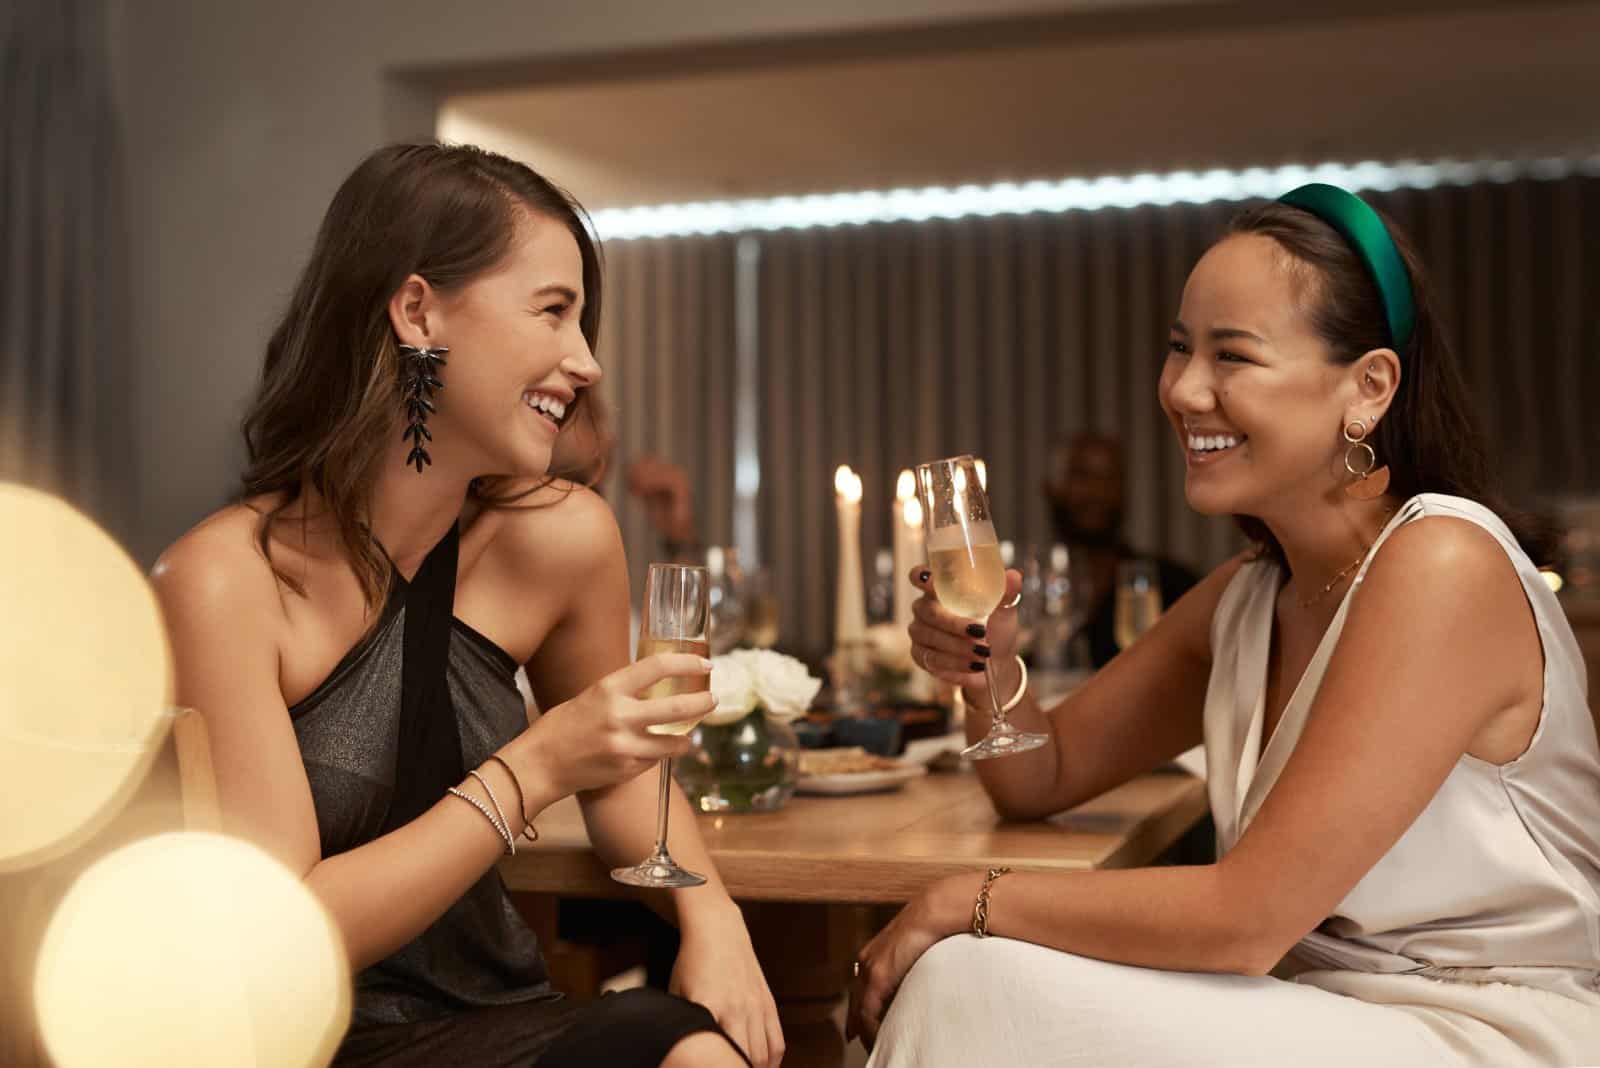 Image Credit: Shutterstock / PeopleImages.com – Yuri A <p><span>A well-placed joke can ease tensions, but be mindful of the other person’s sense of humor, especially if your initial connection was online and you’re still gauging their reactions in person.</span></p>